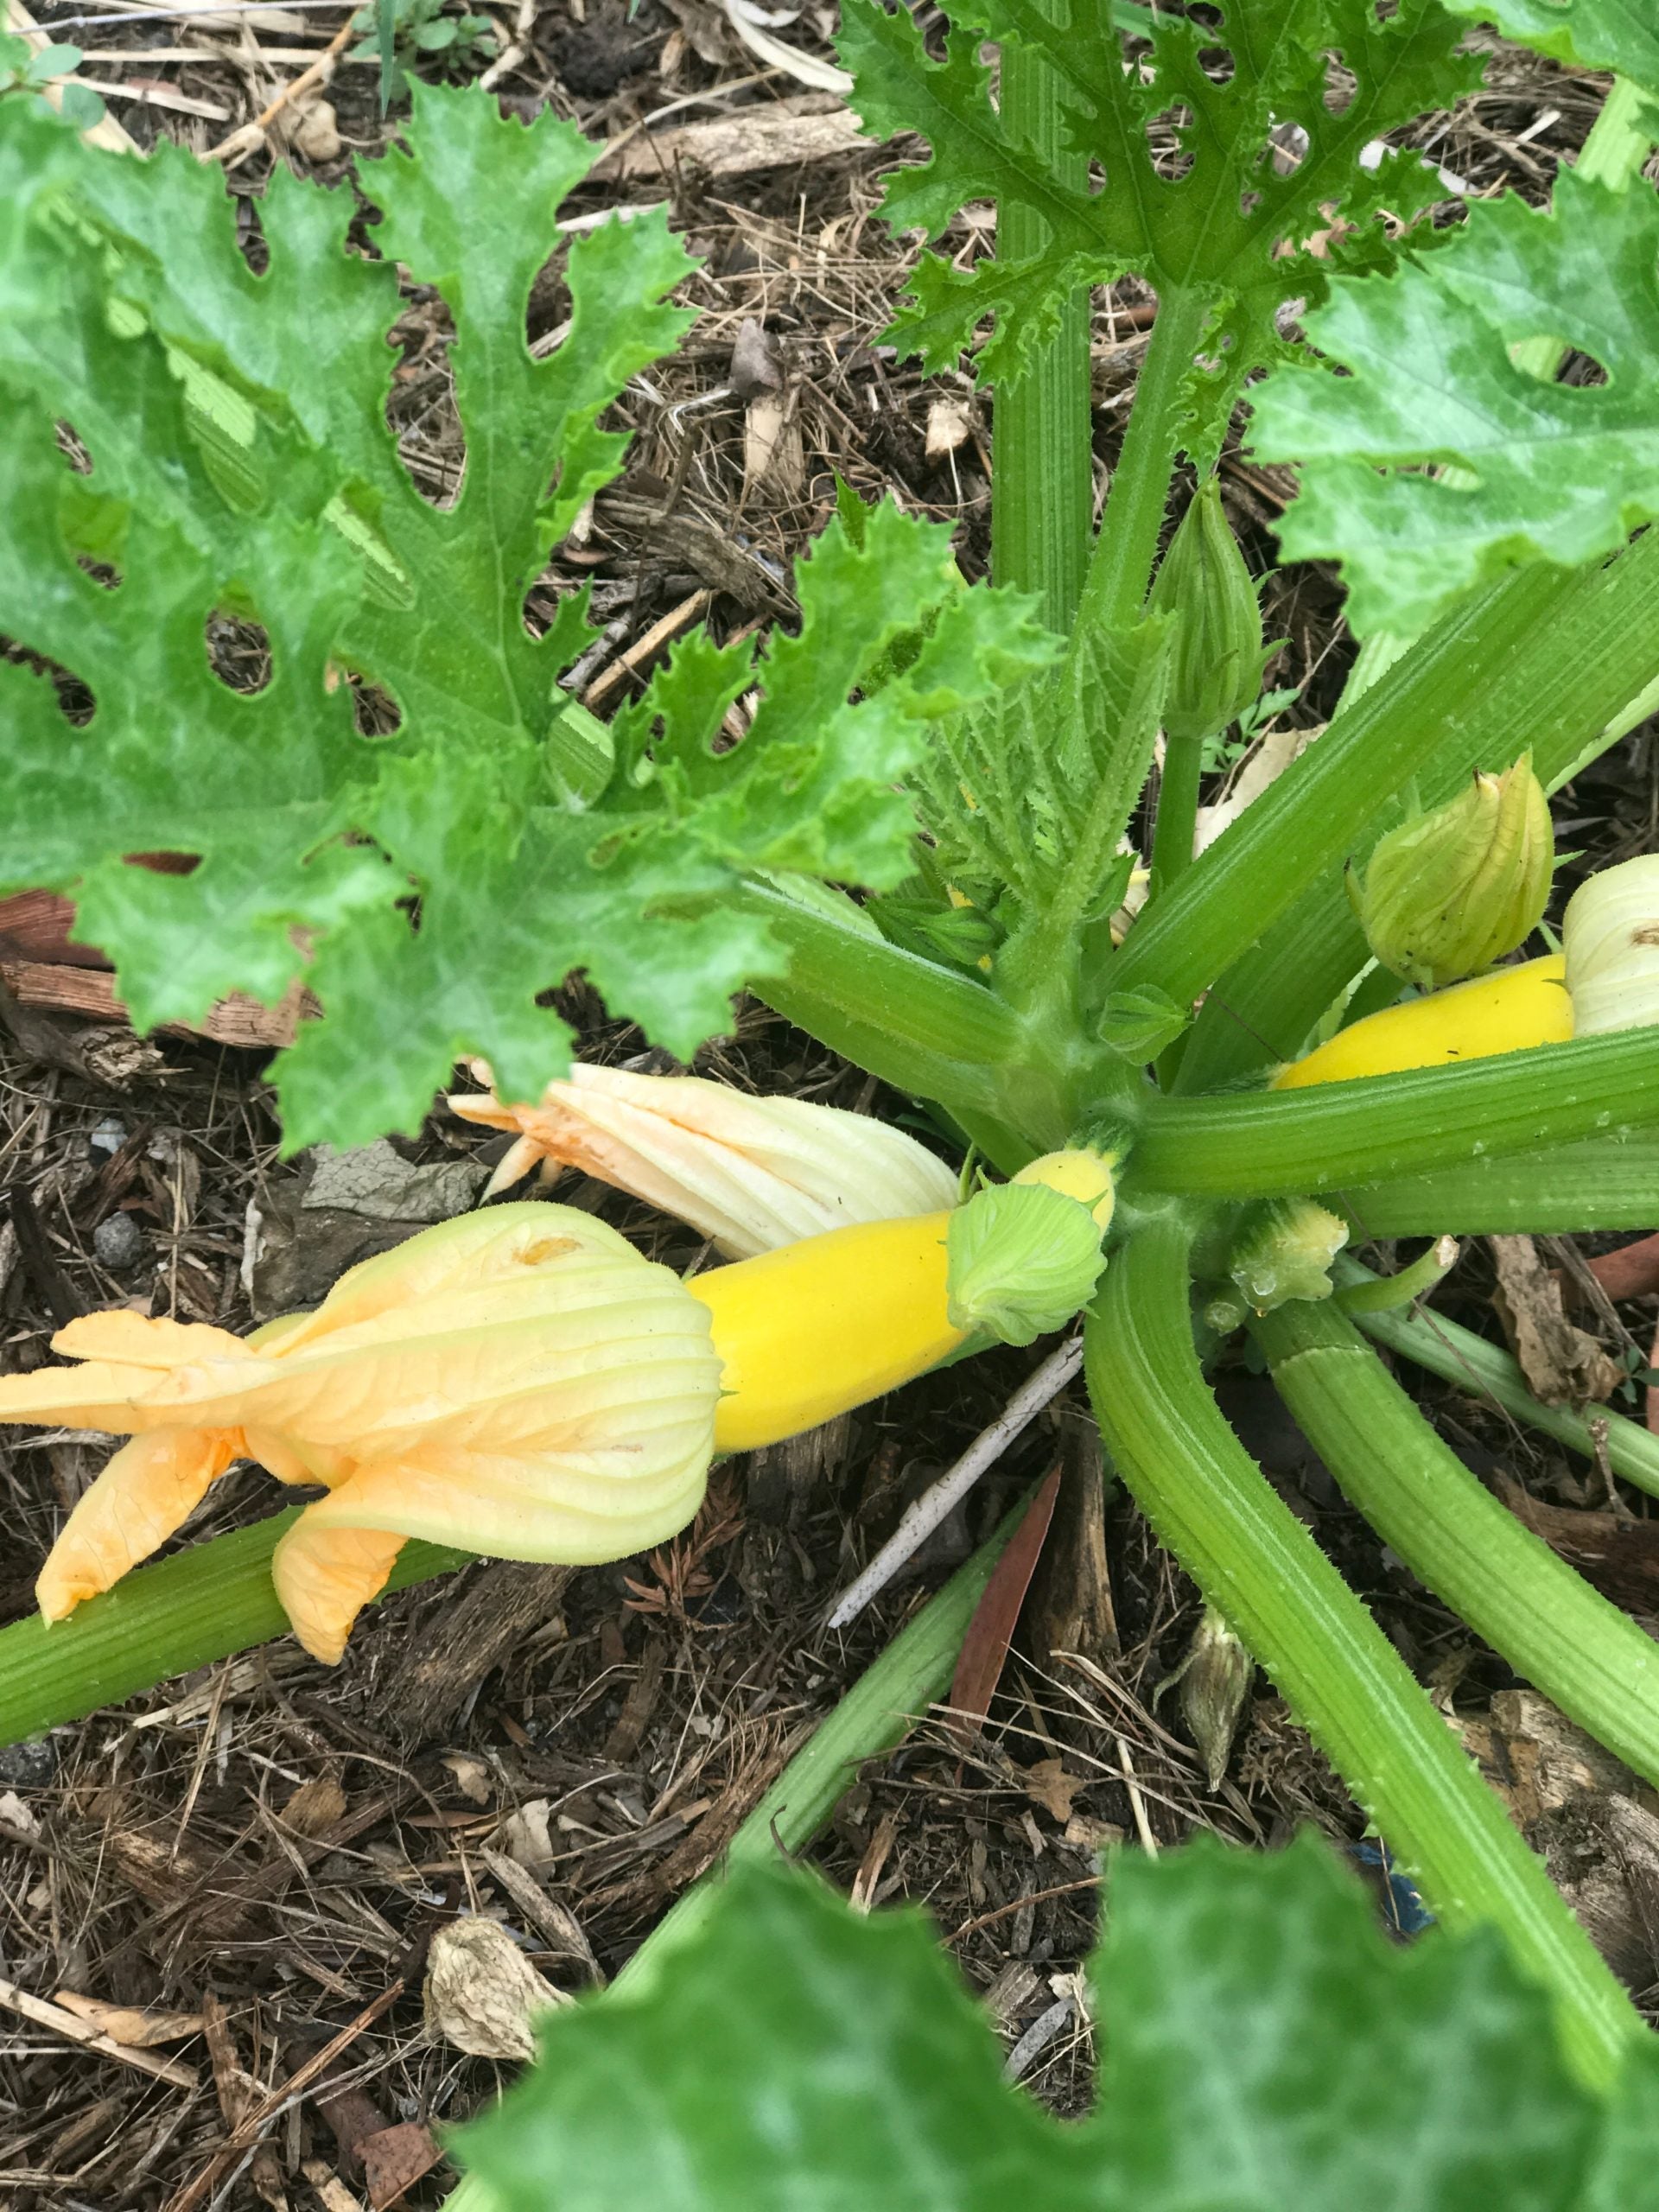 Zucchini that has been pollinated